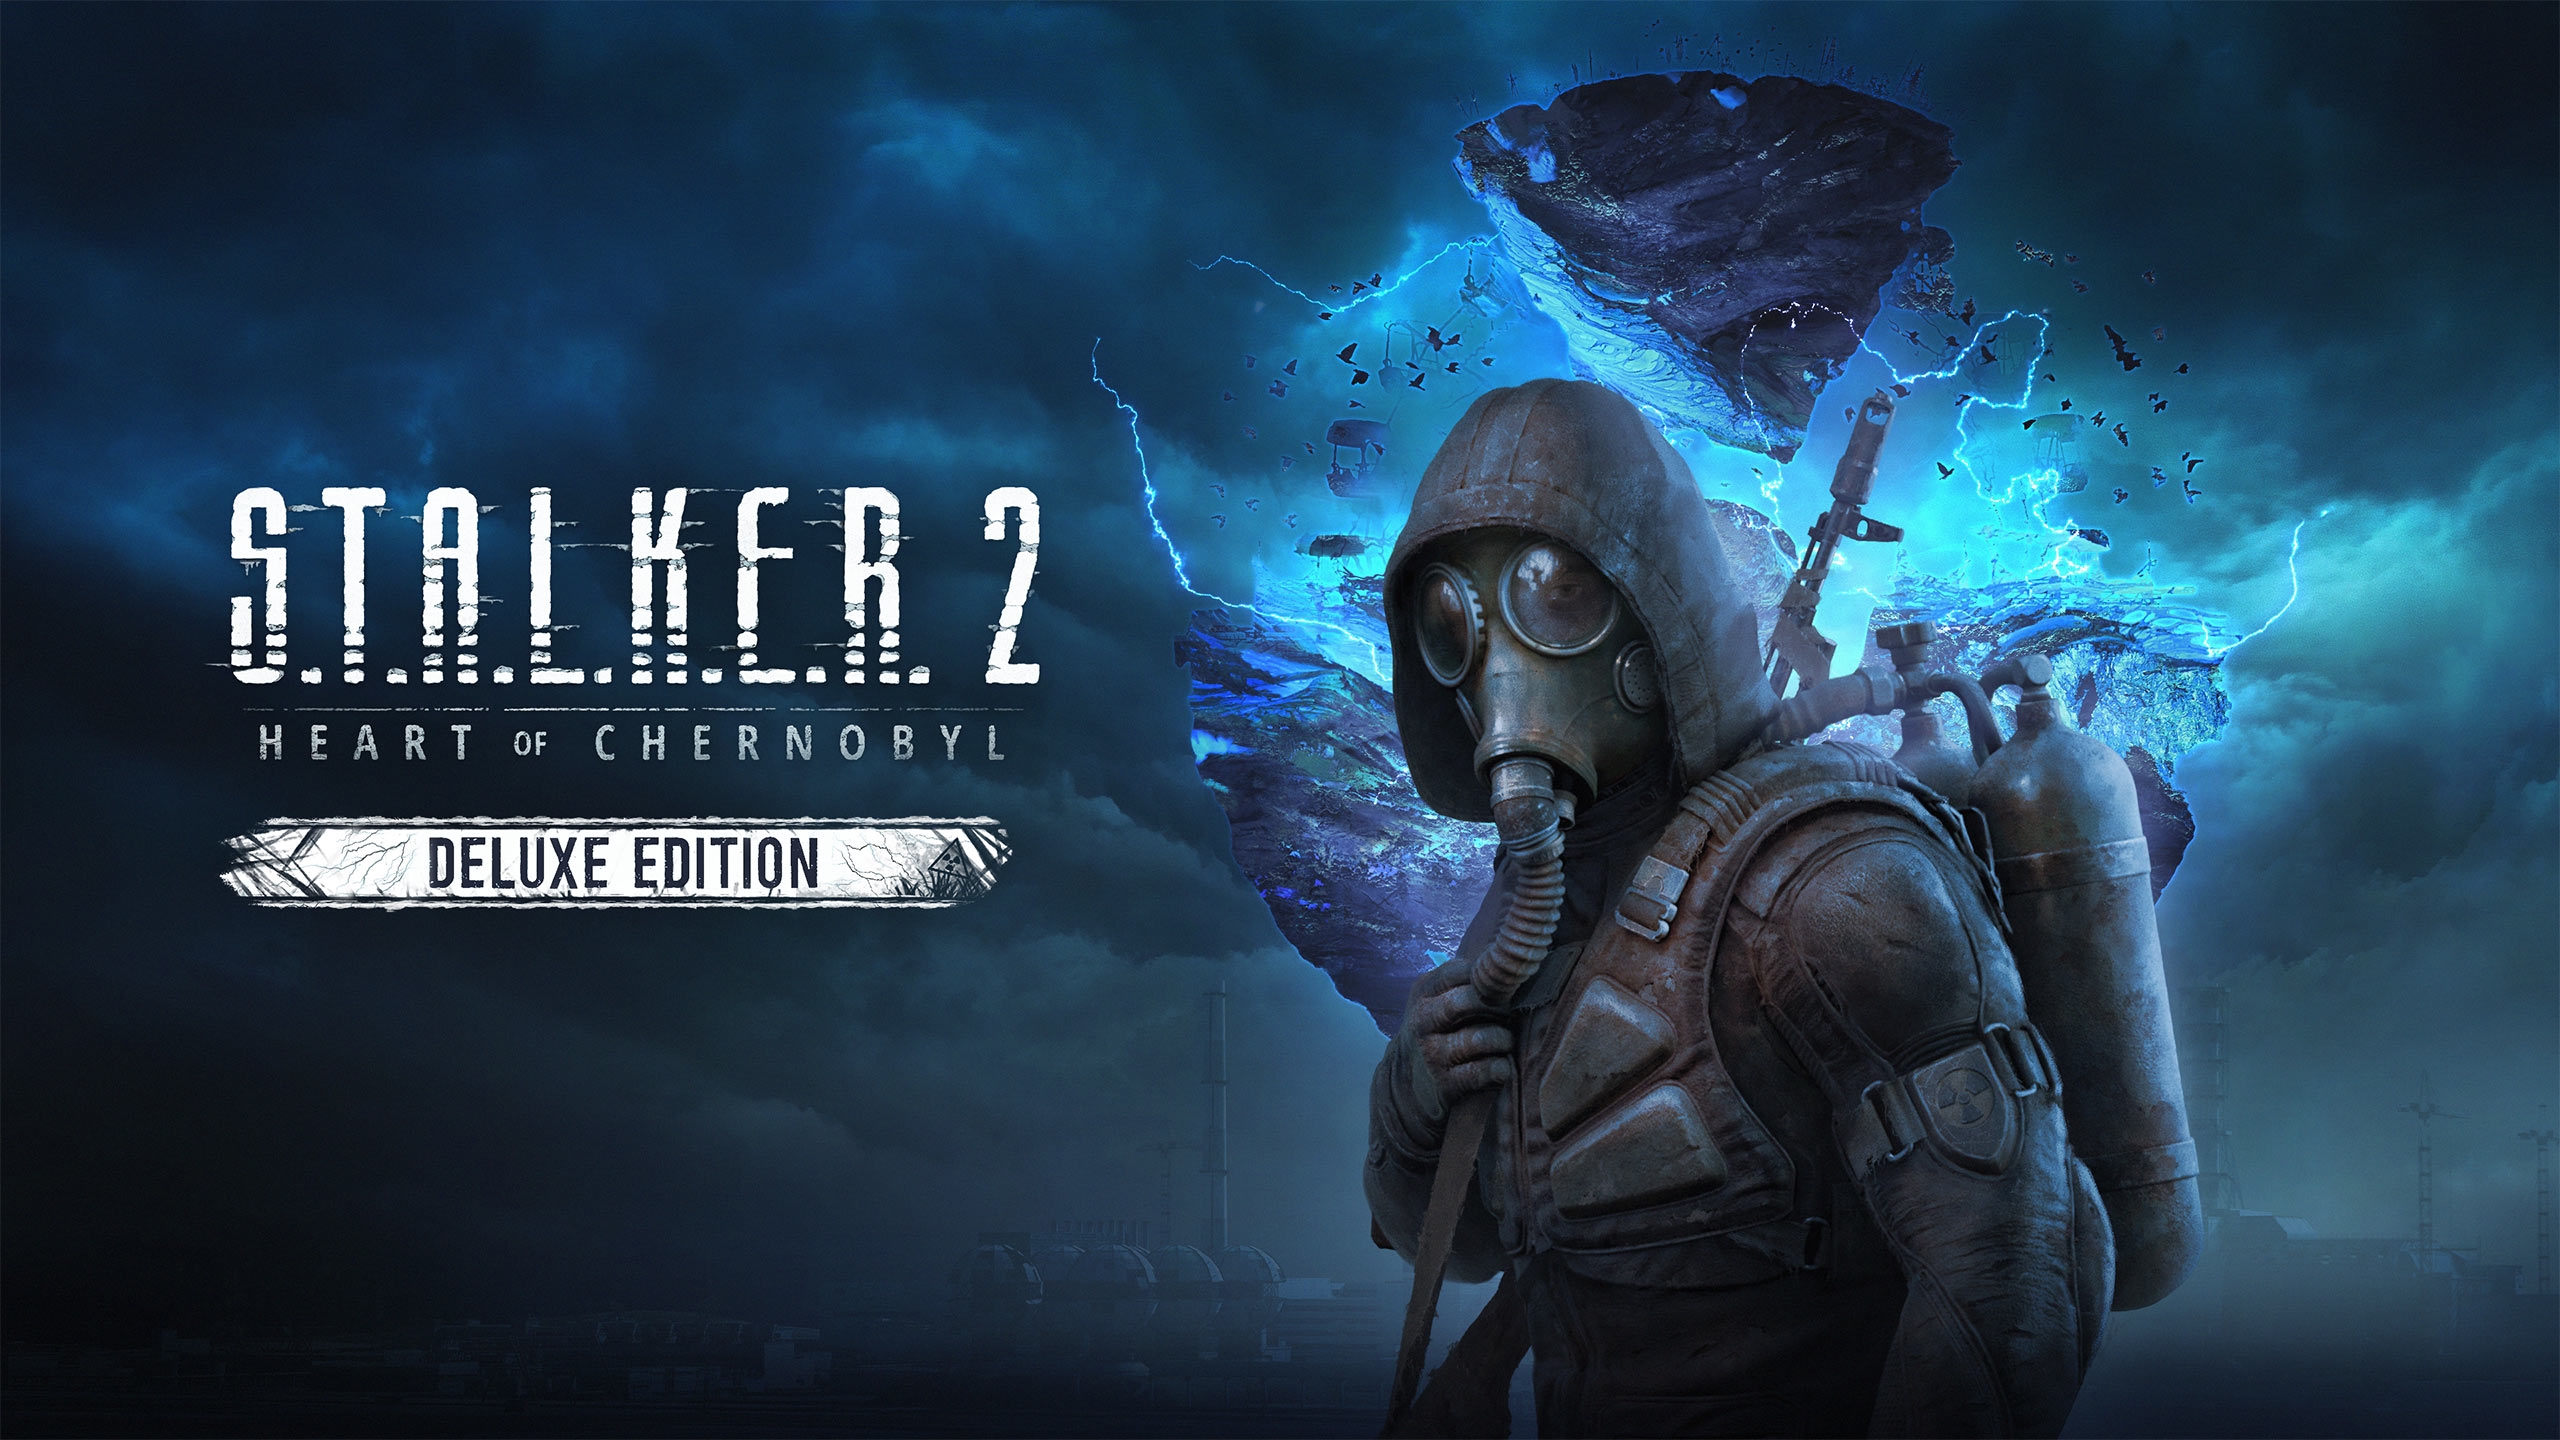 Reviews S.T.A.L.K.E.R. 2: Heart of Chornobyl Deluxe Edition